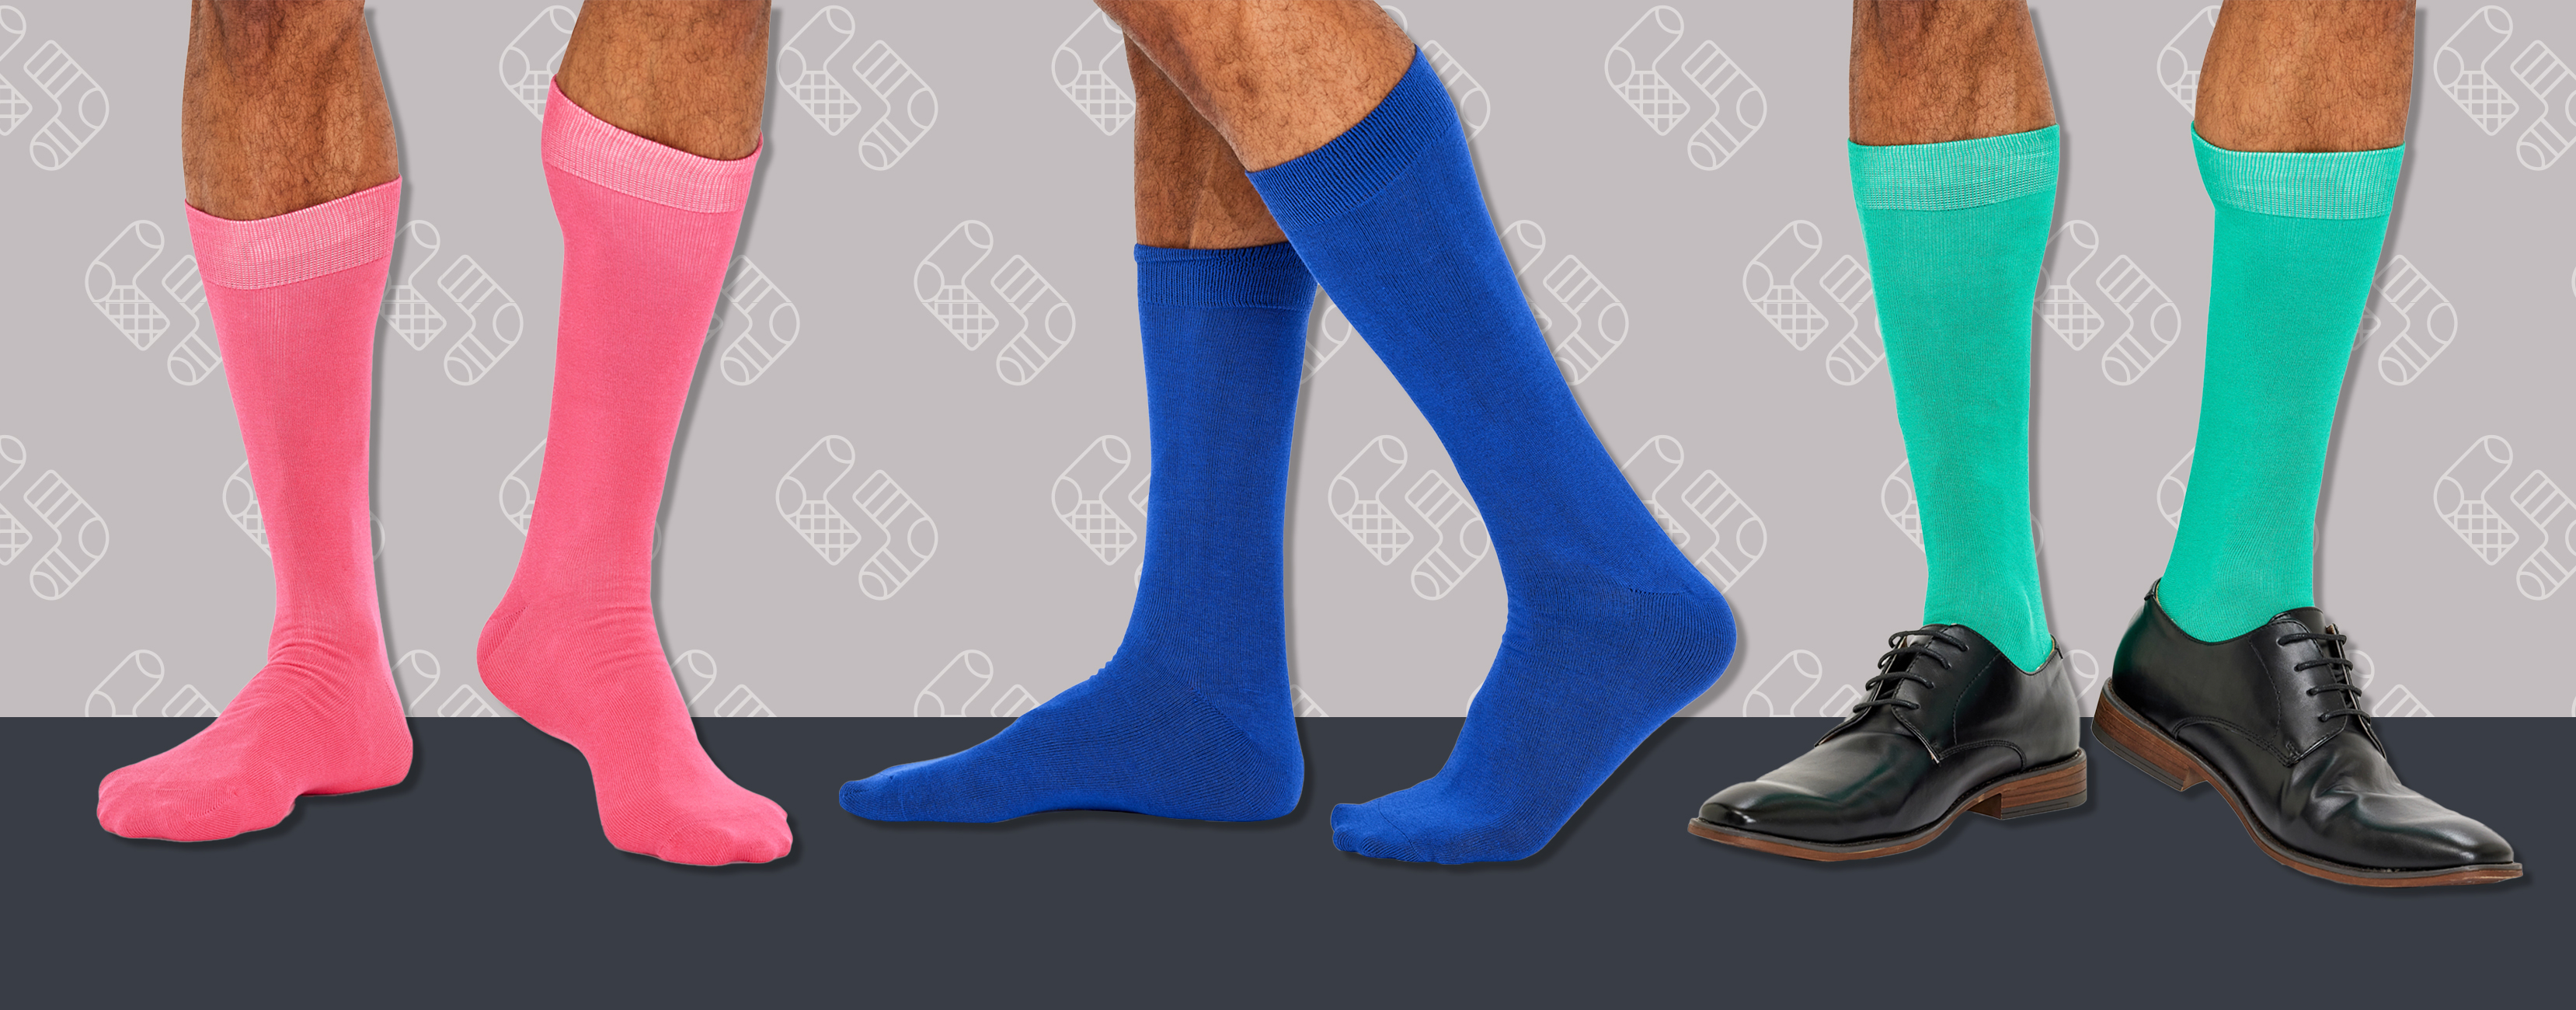 The Ultimate Guide To The Best Boot Socks In Australia - socks.com.au